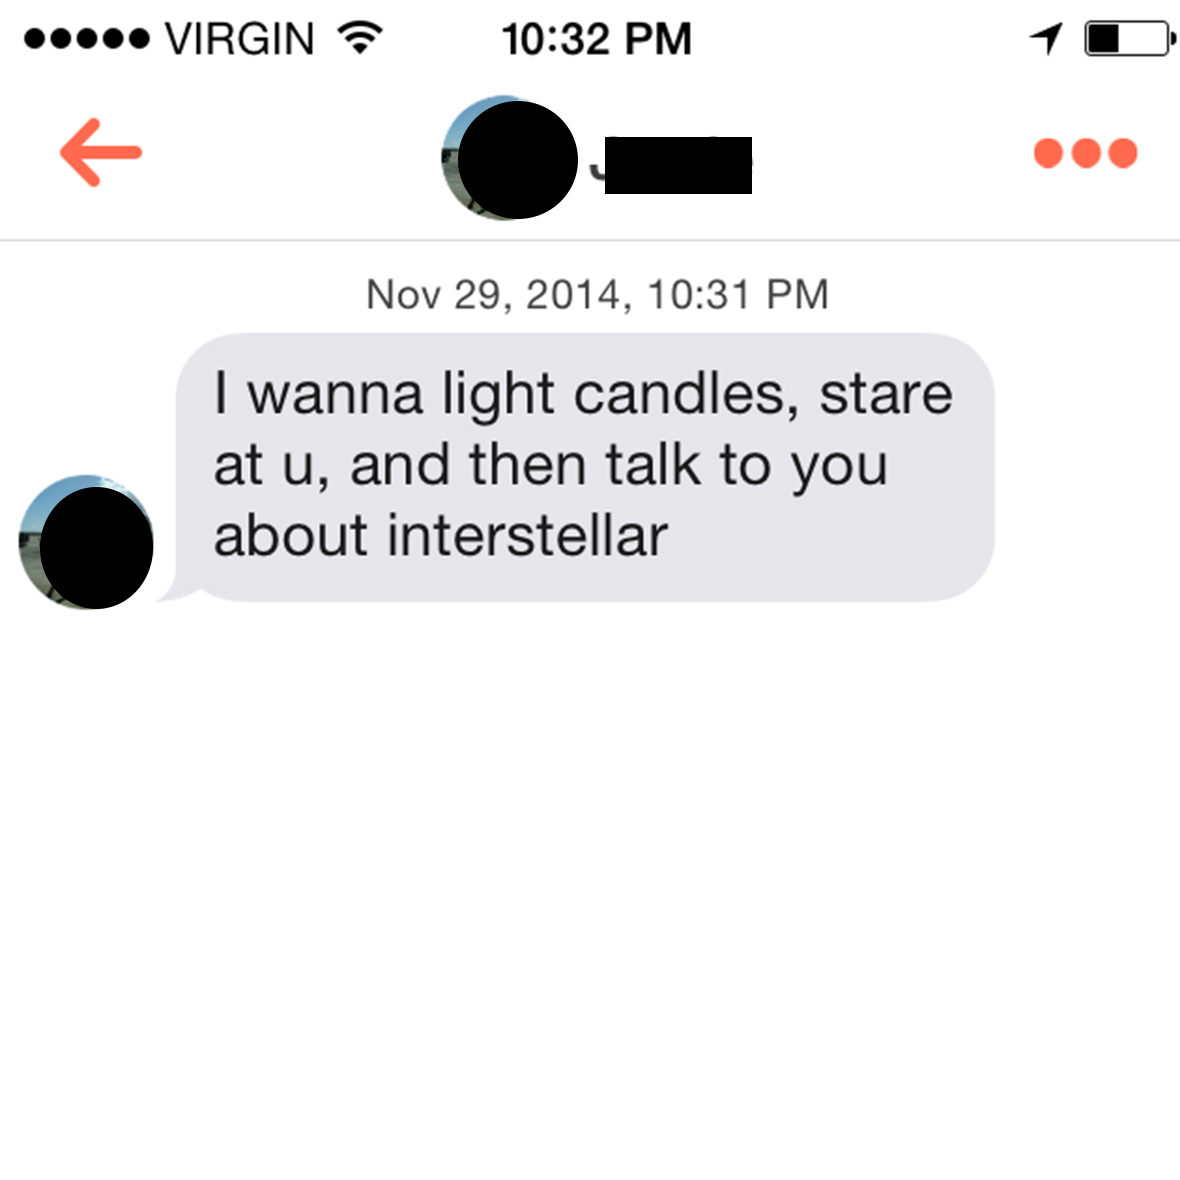 Tinder message with blurred out name and photo reading "I wanna light candles, stare at u, and then talk to you about interstellar".